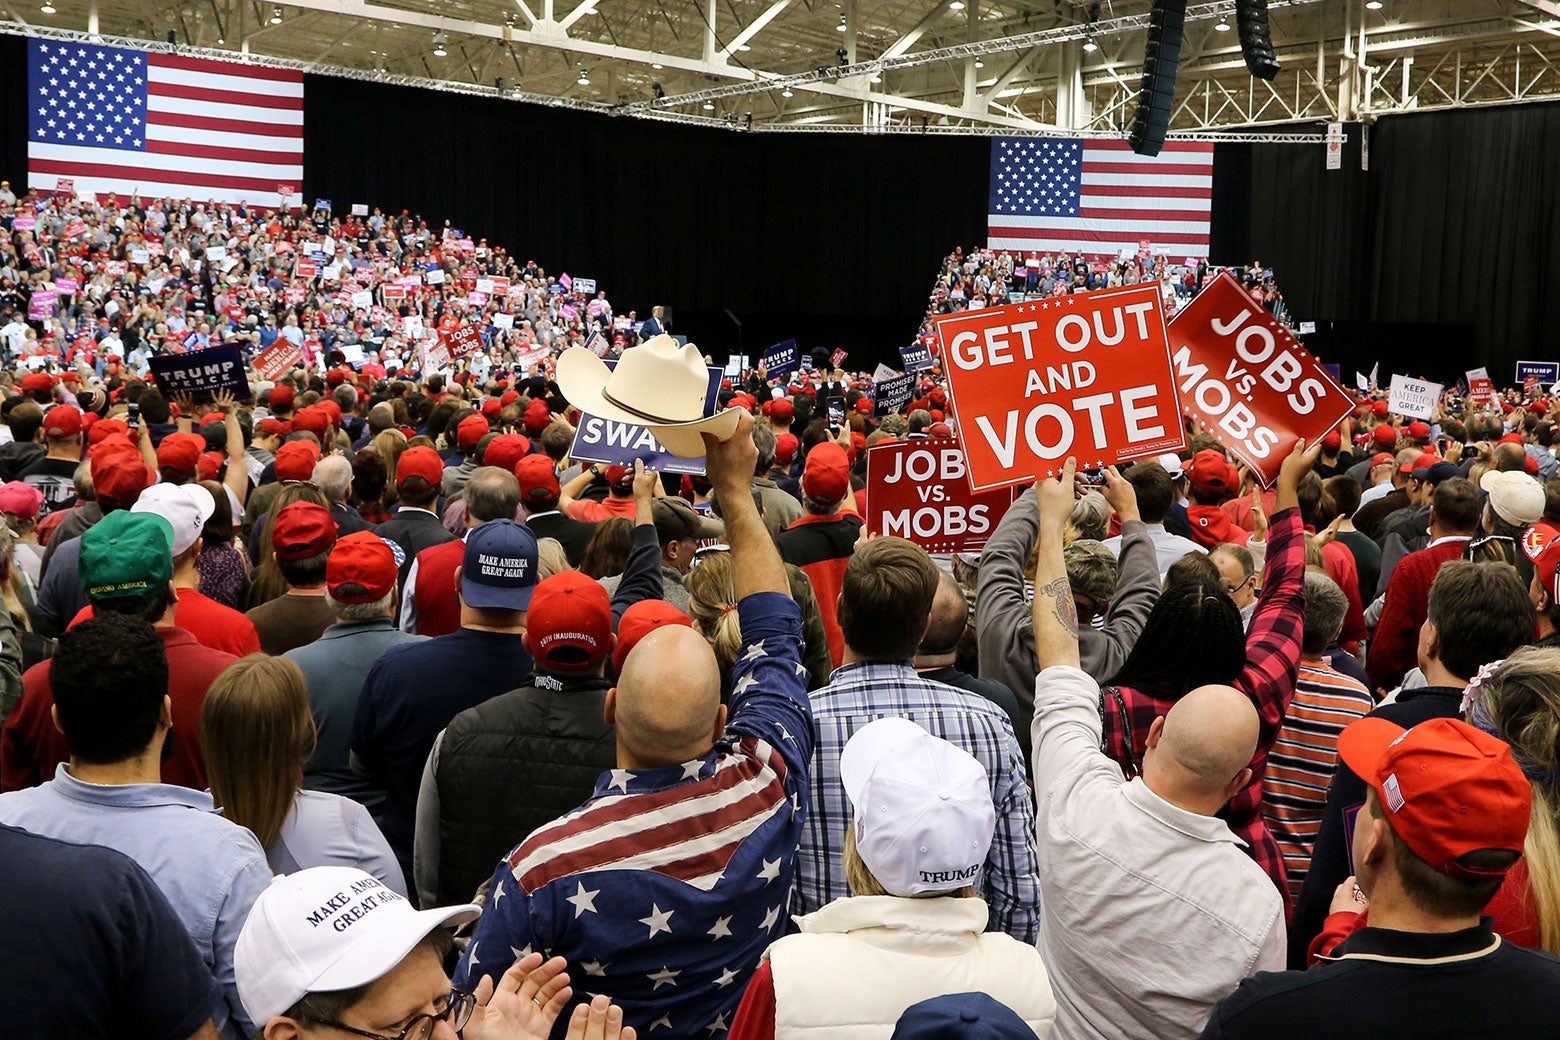 Supporters of U.S. President Donald Trump listen to the president speak at his rally in support of Ohio Republican candidates on Nov. 5 in Cleveland.